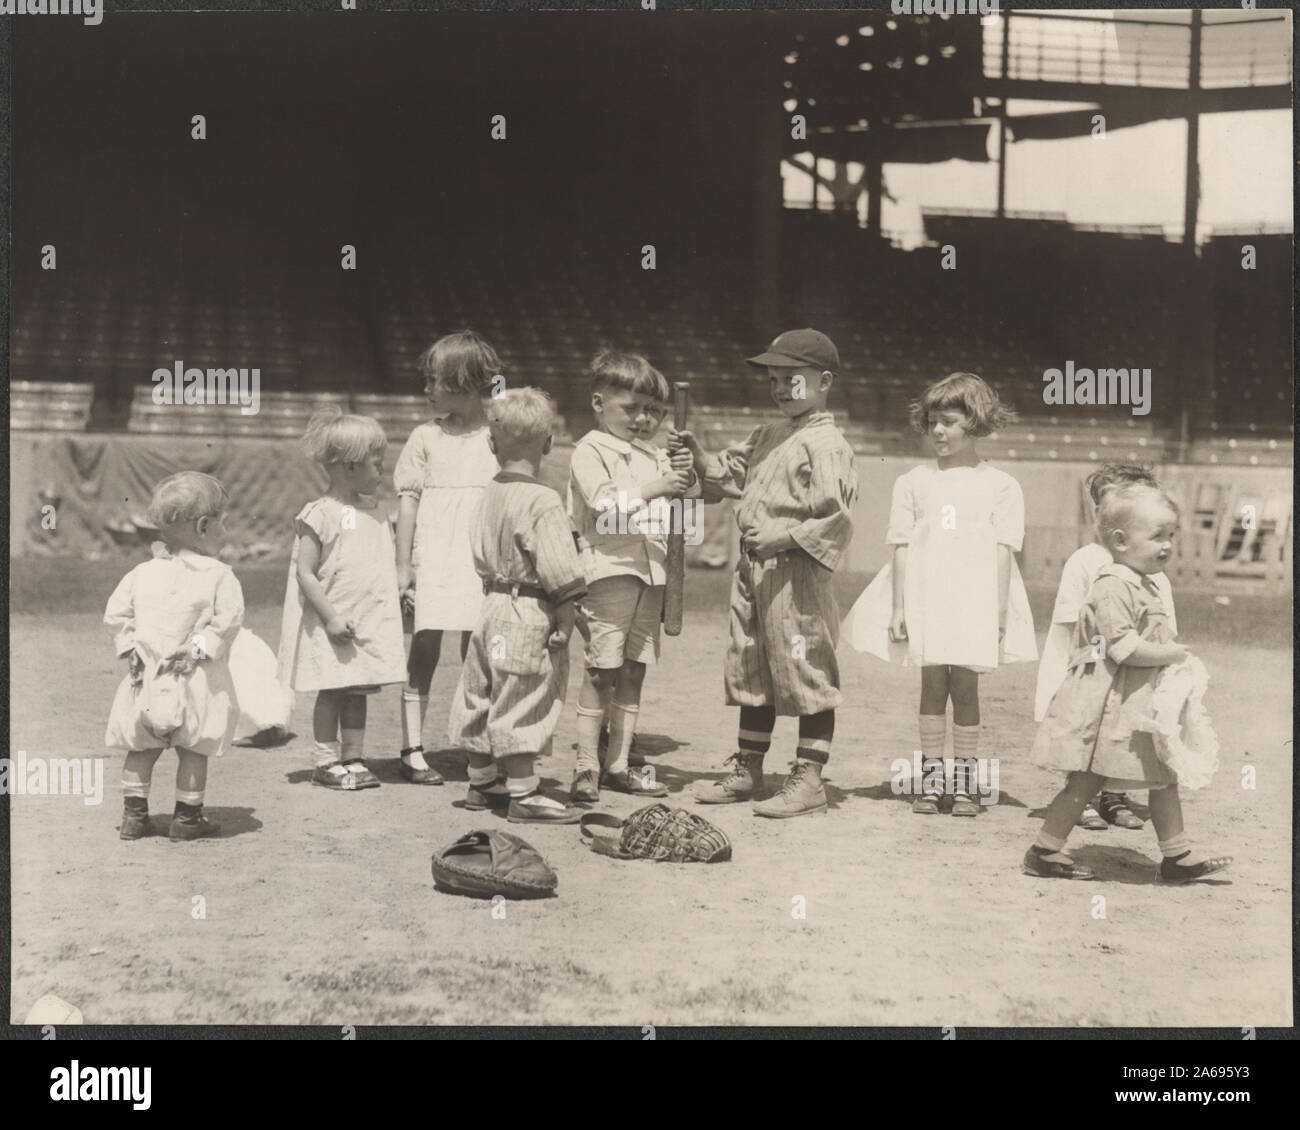 Young boys and girls on the baseball field at a major league stadium Stock Photo